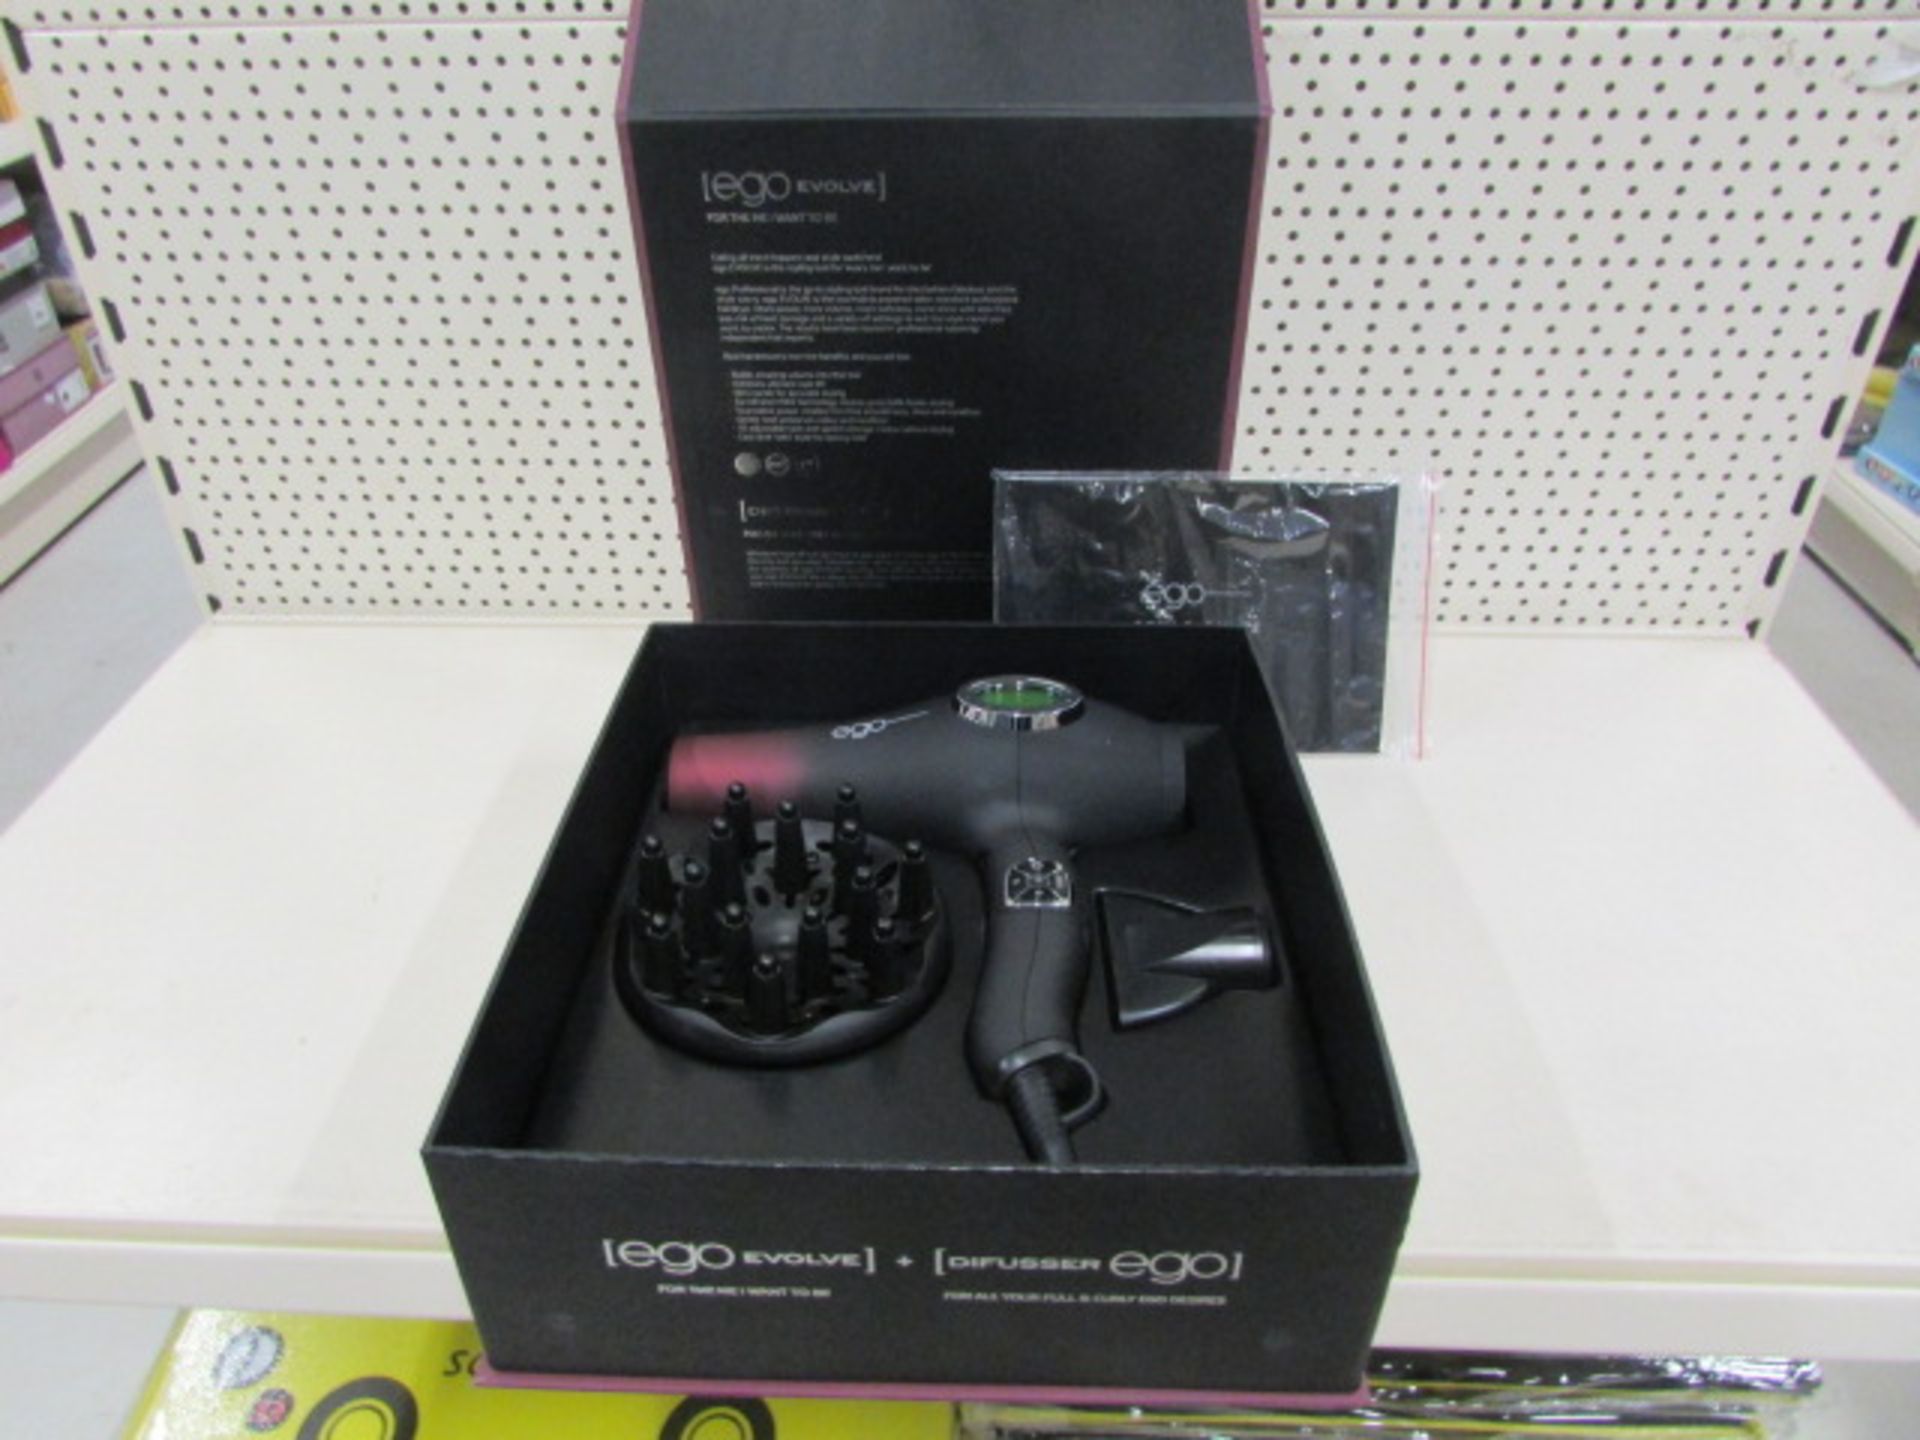 5 X Ego Professional Ego Evolve Hairdryer + Difusser [Brand New] - Image 5 of 6